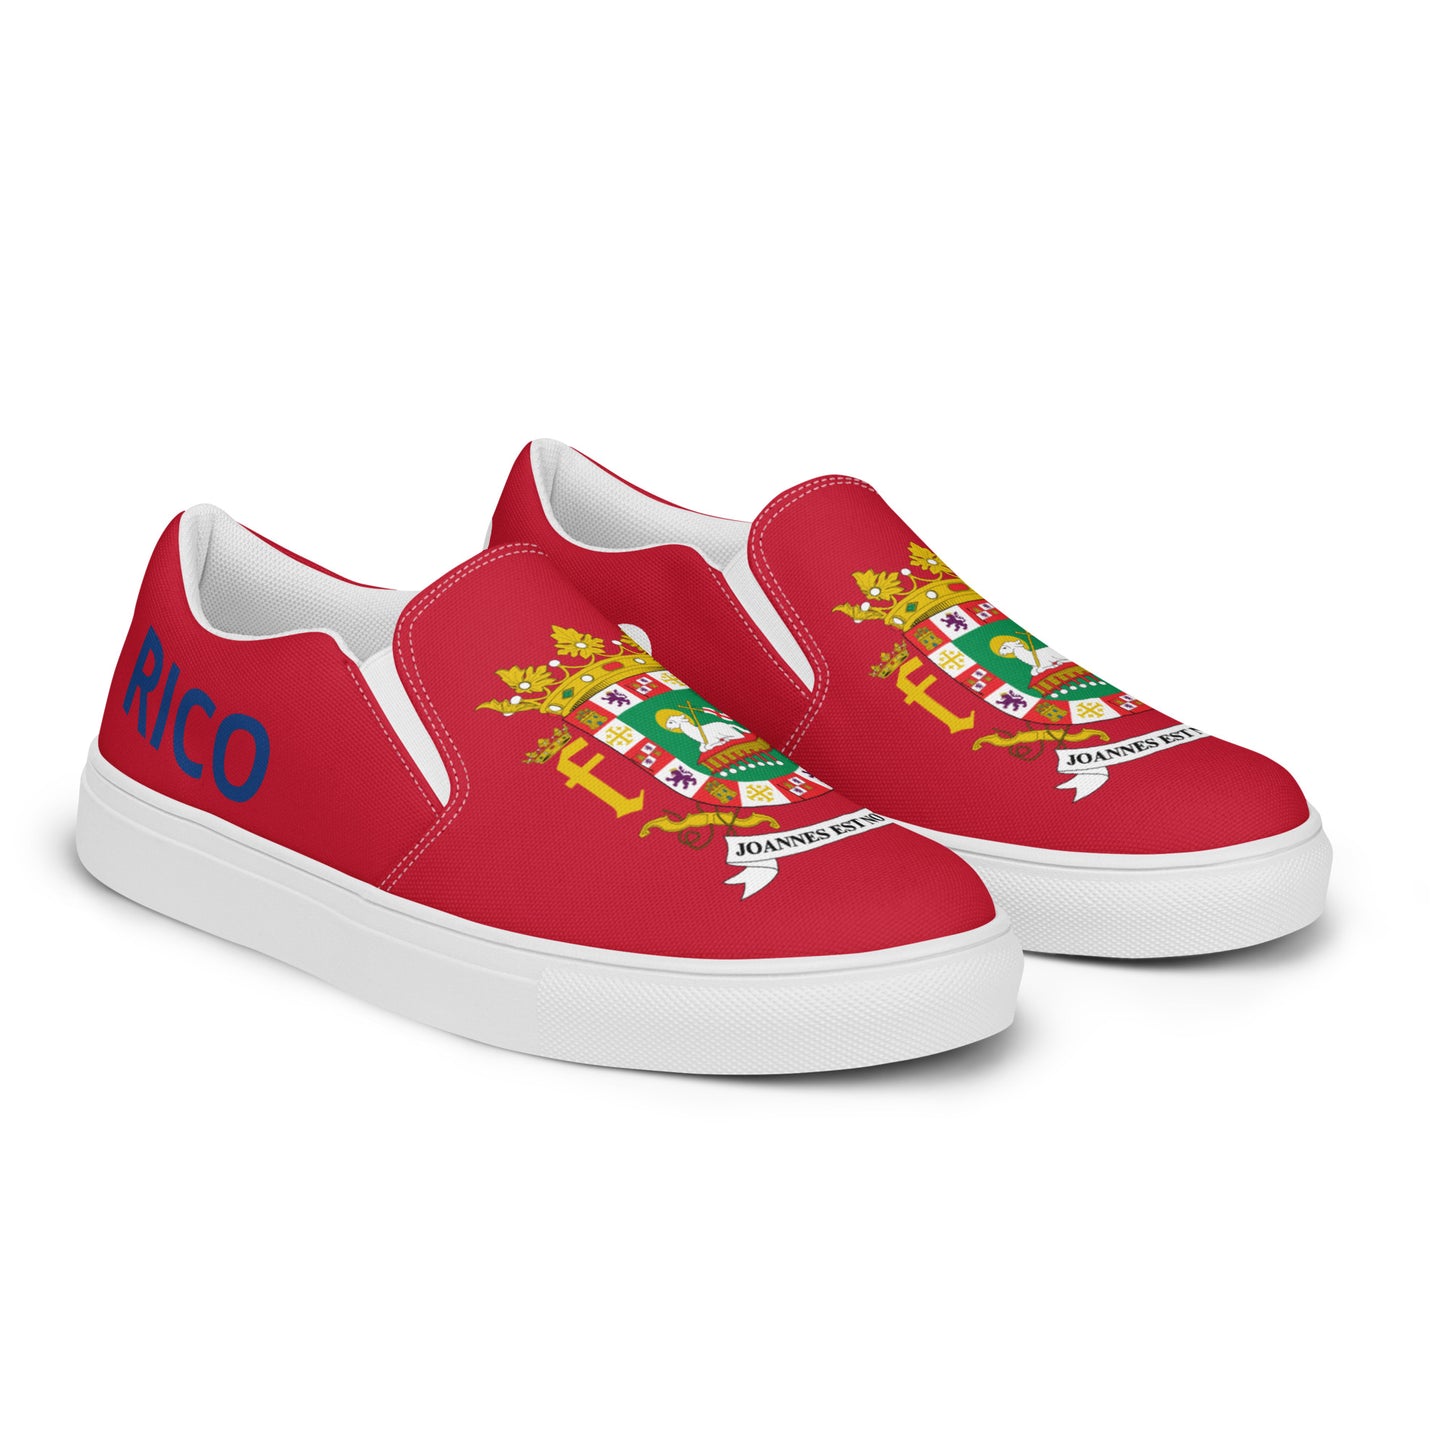 Puerto Rico - Women - Red - Slip-on shoes